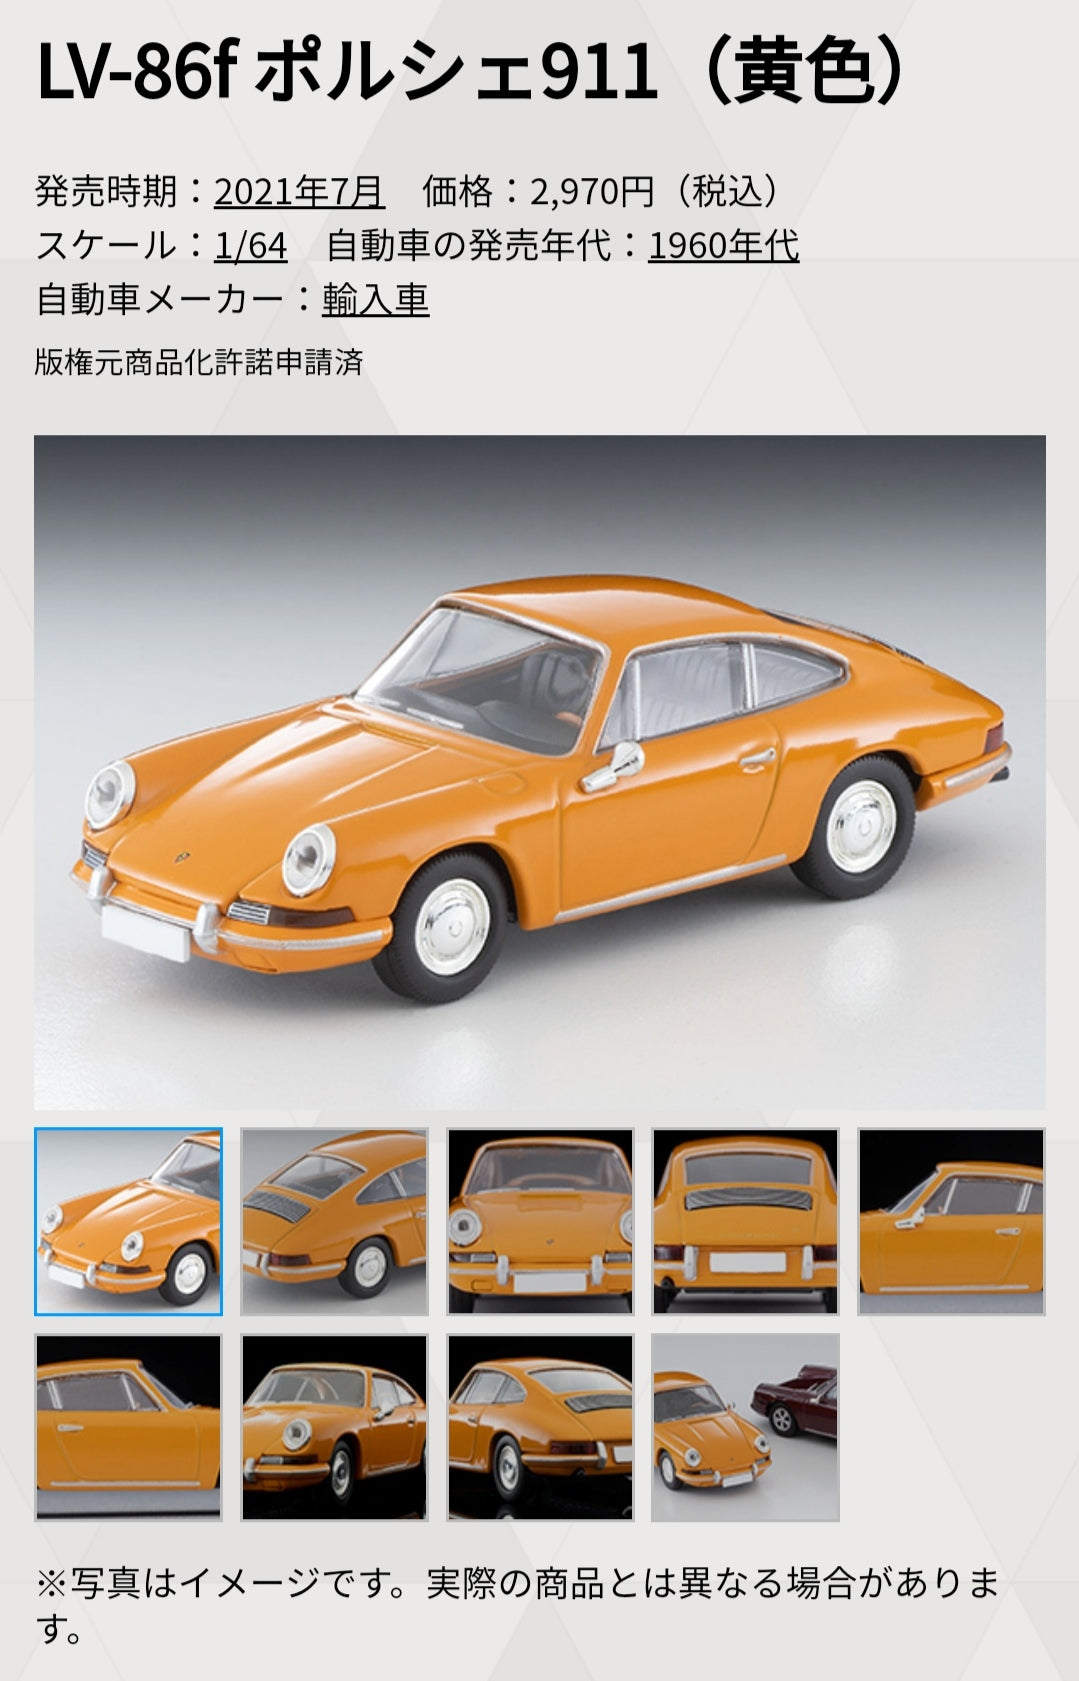 Tomica Limited Vintage LV-86f 1:64 Scale Porsche 911s Yellow